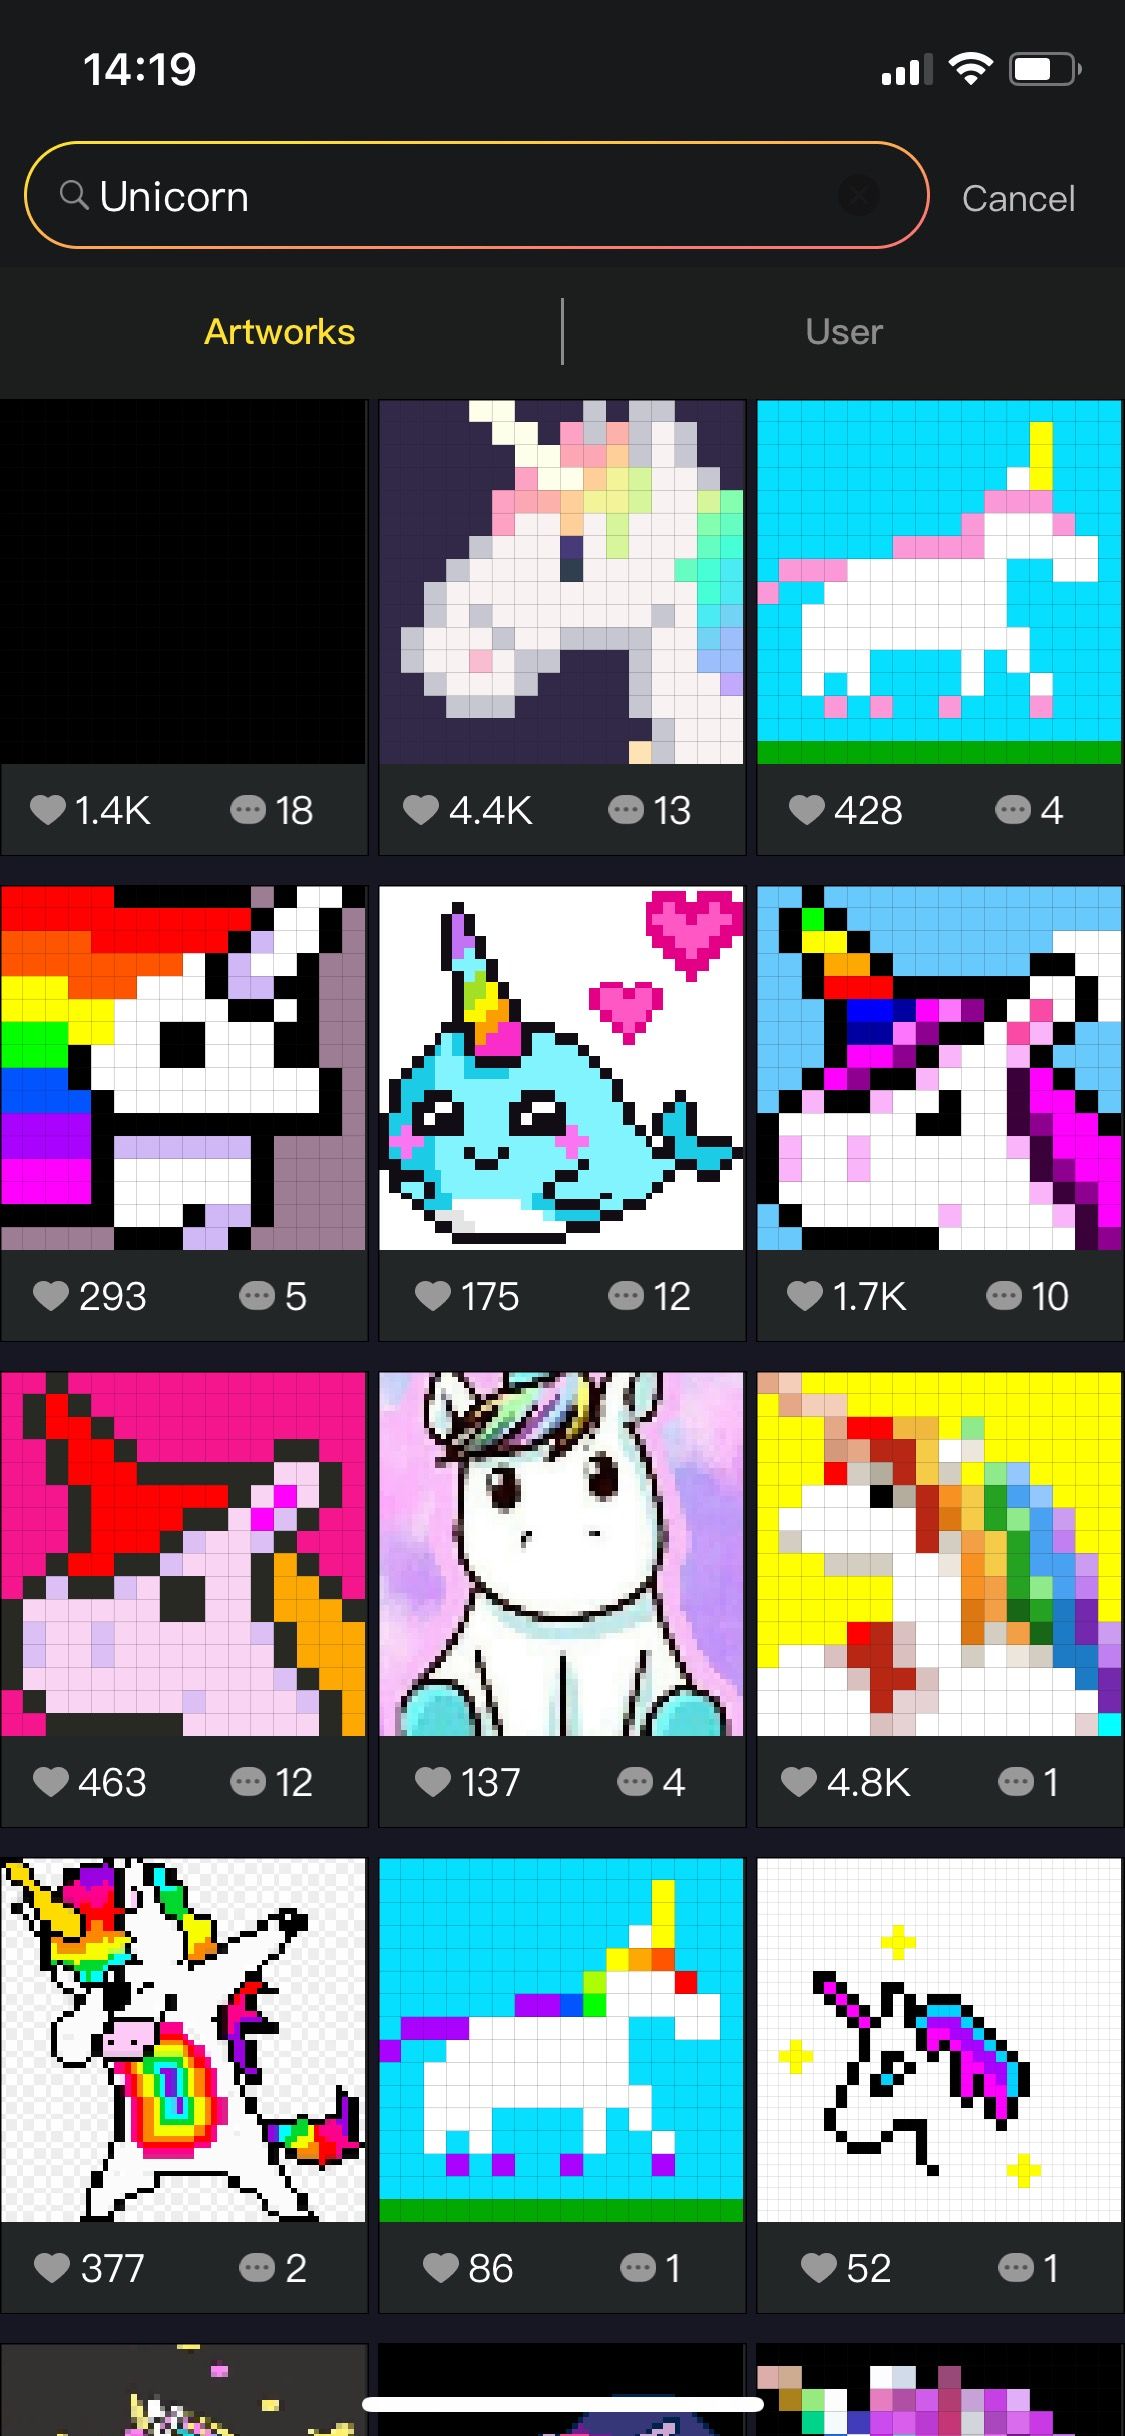 pixoo64 divoom app - library search for unicorns